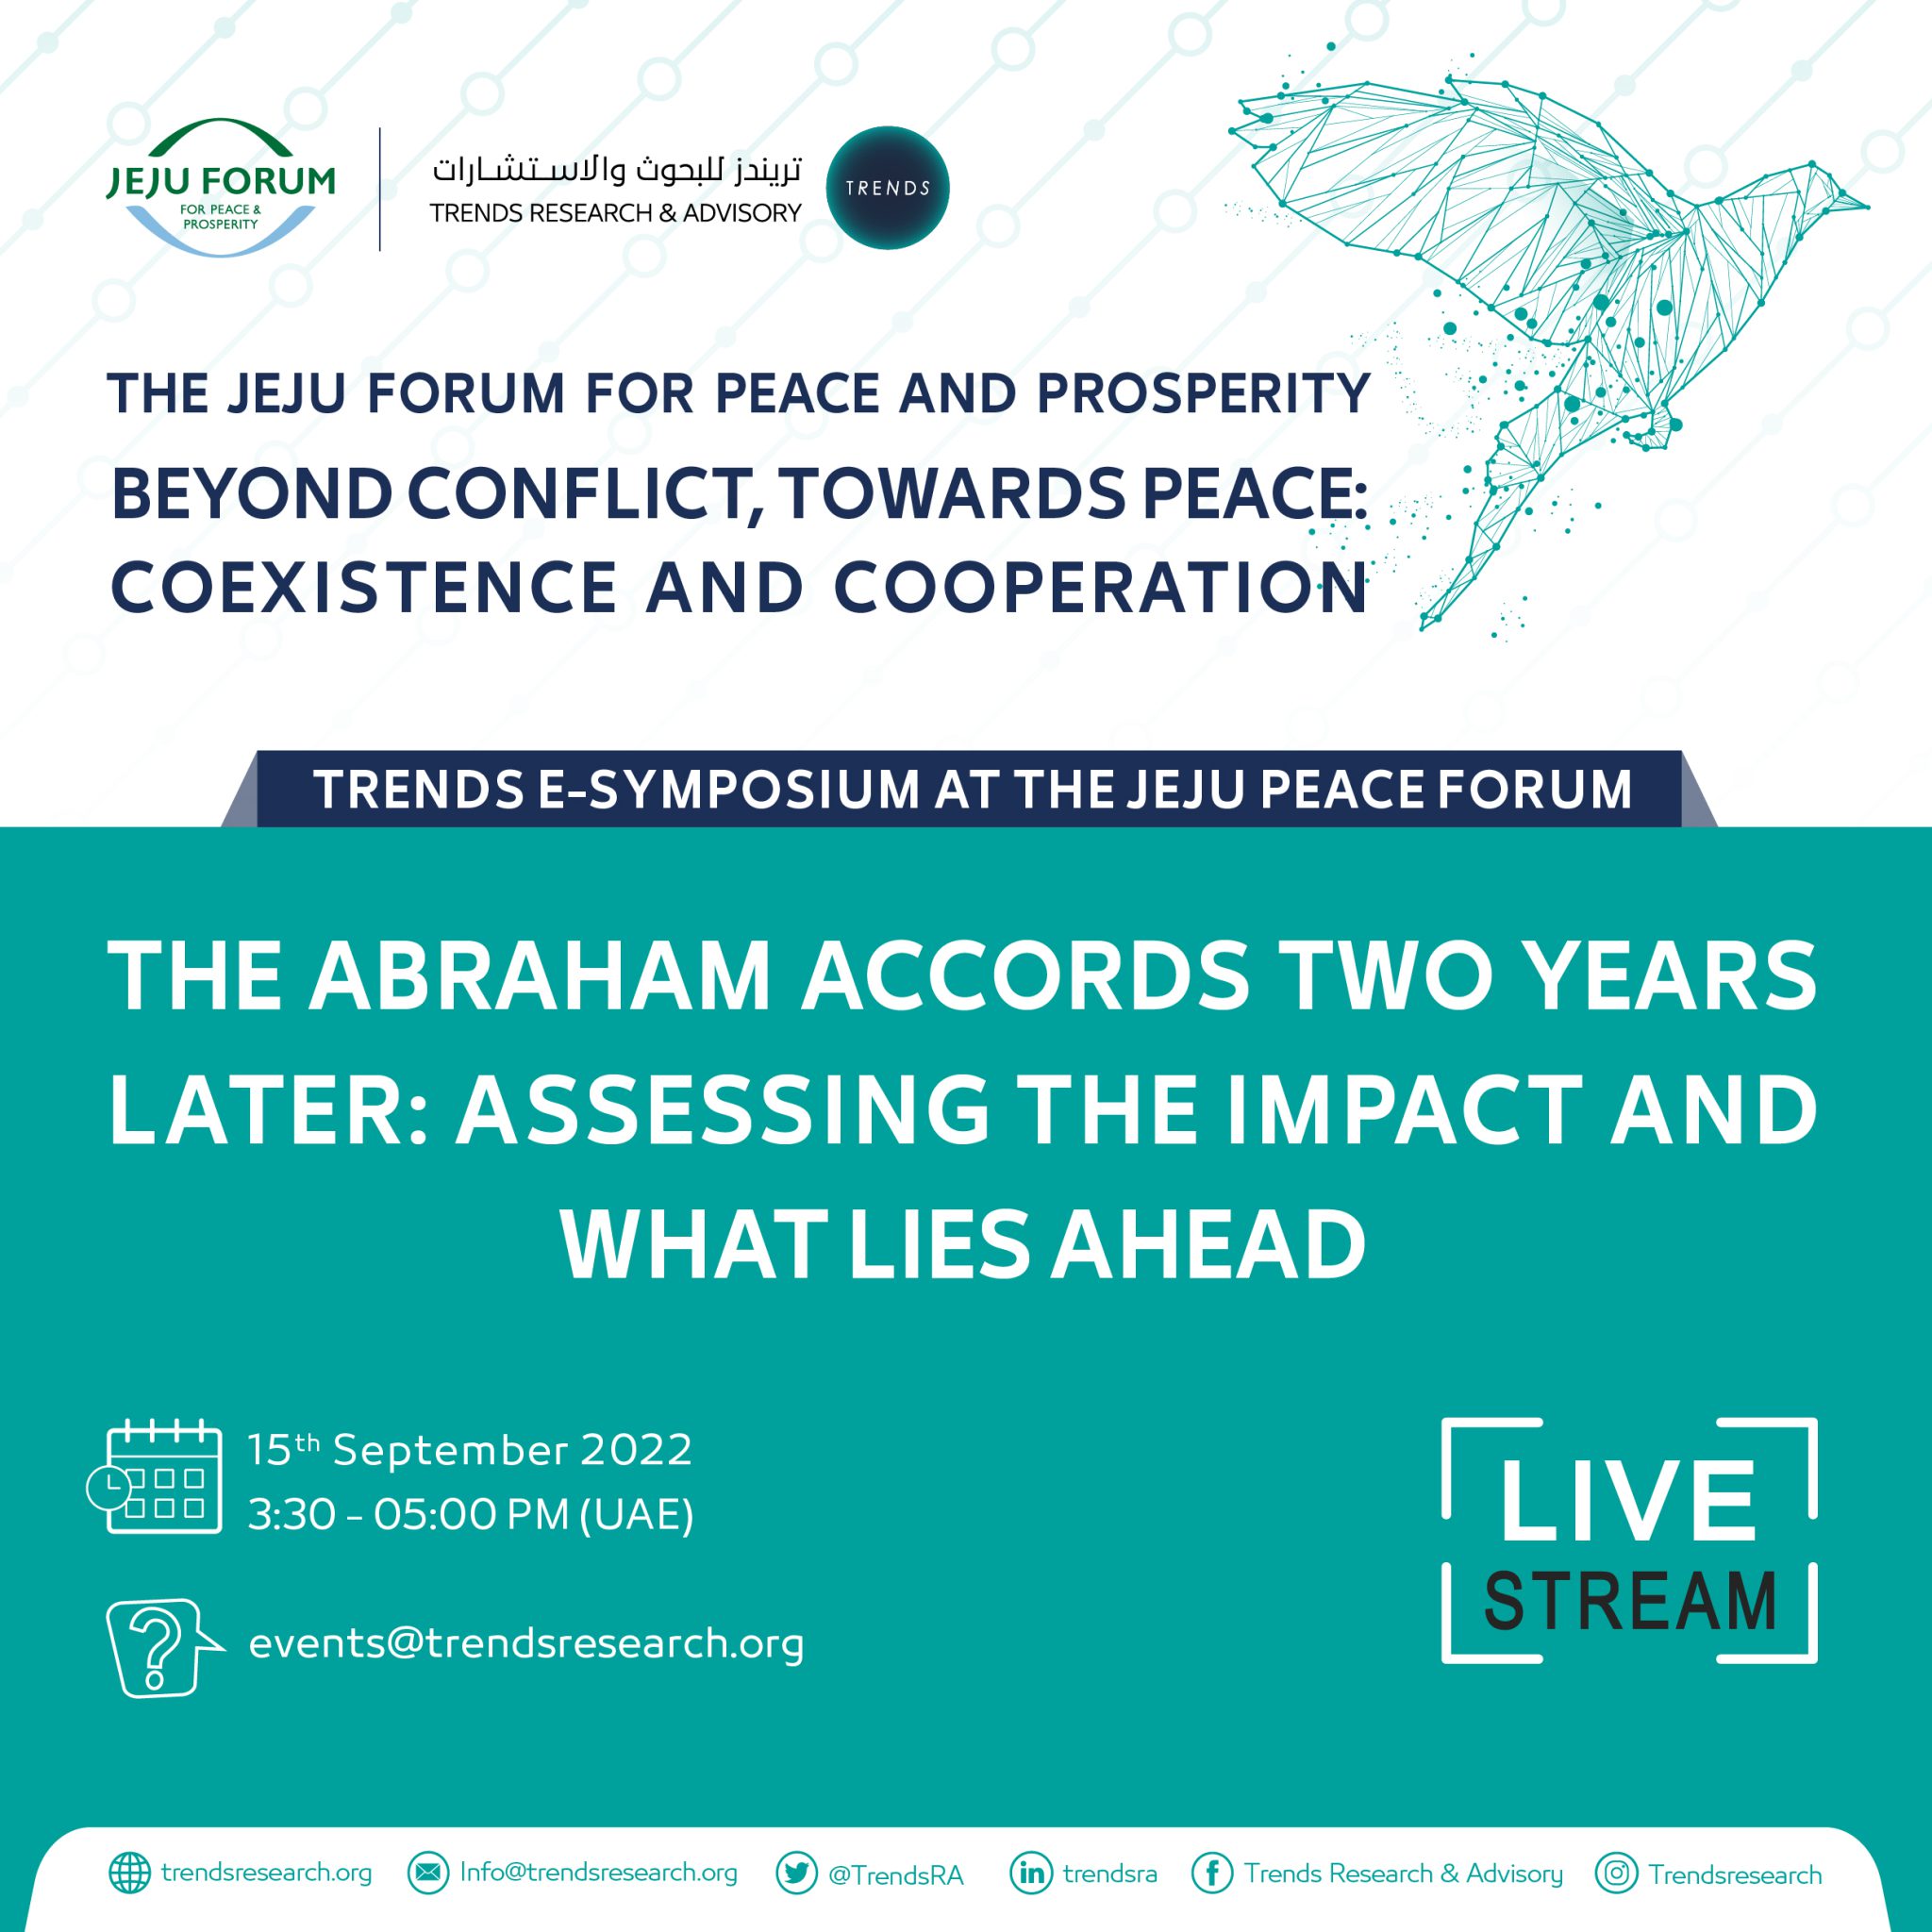 The Abraham Accords Two Years Later: Assessing the Impact and What Lies Ahead